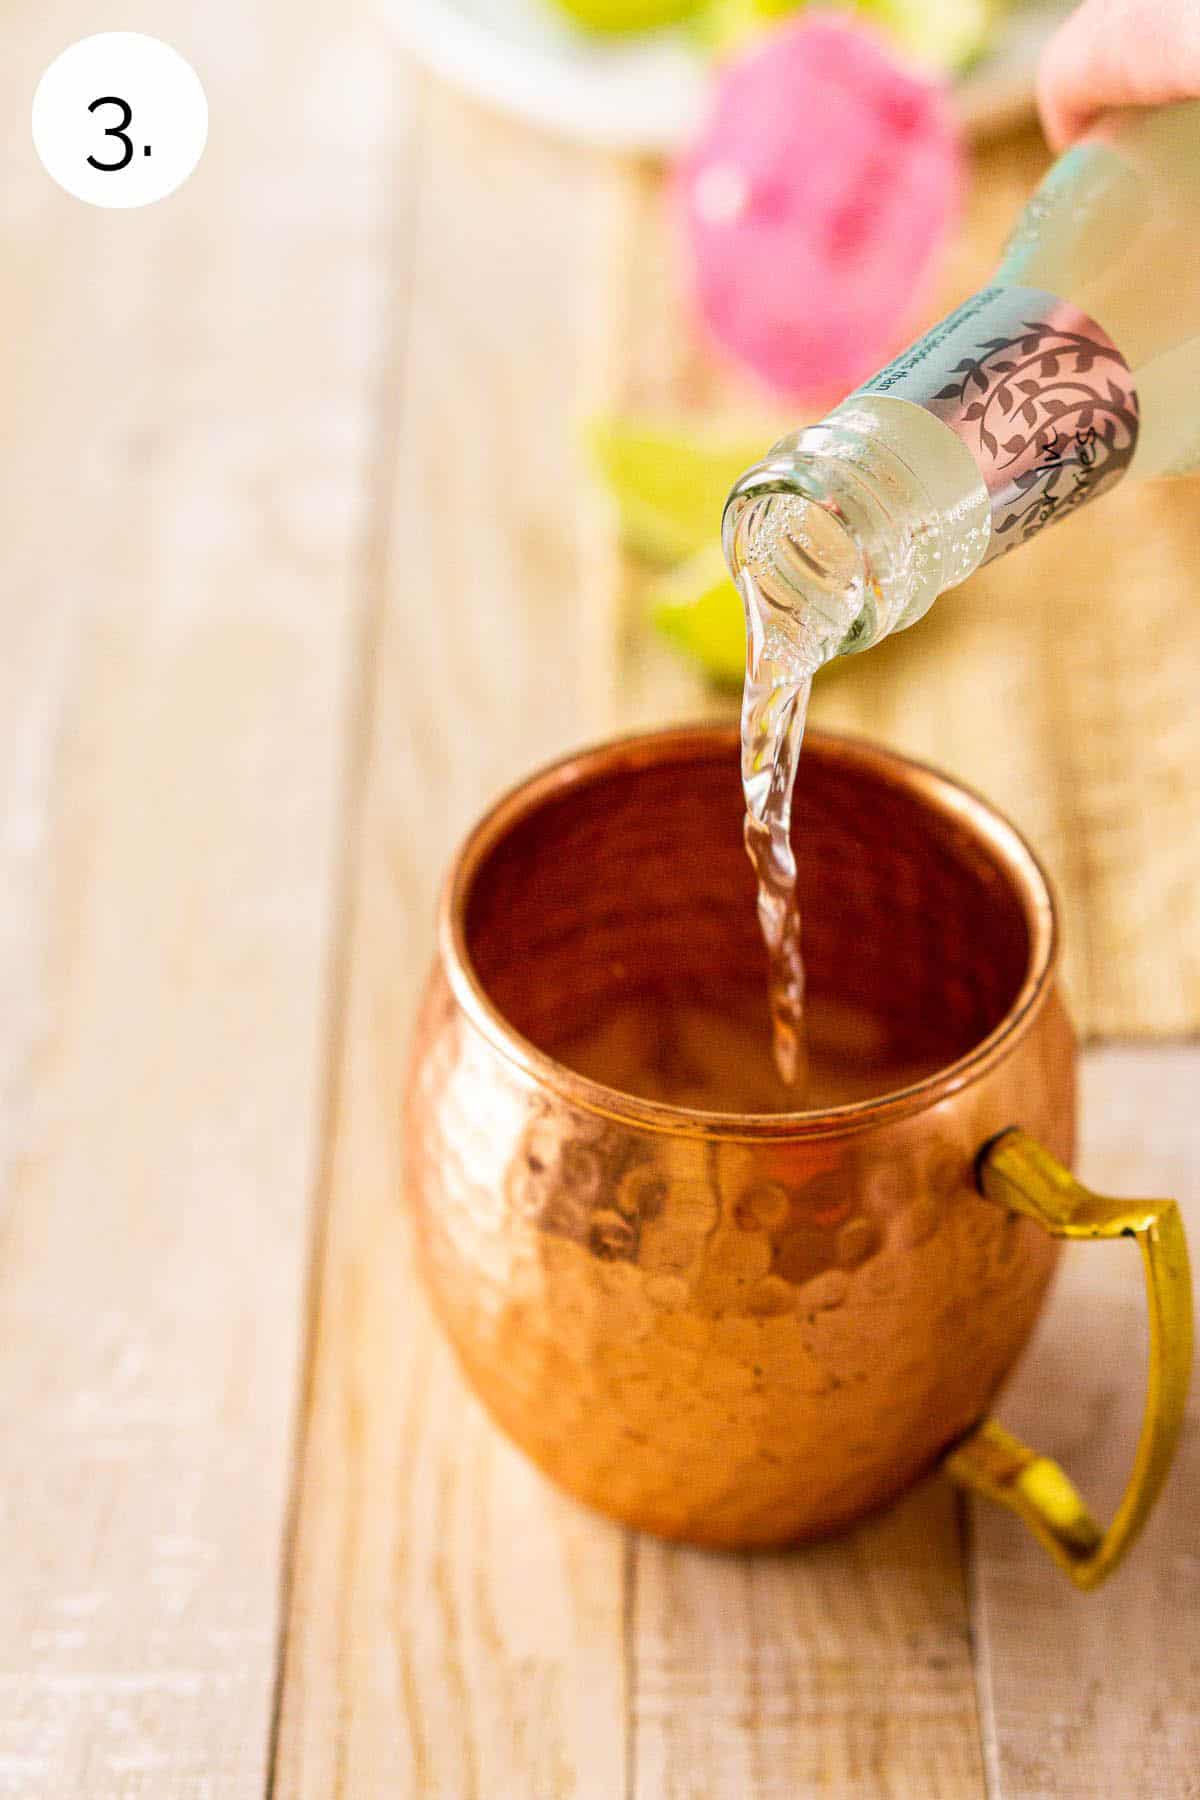 A hand pouring a bottle of ginger beer into the copper mug on a cream-colored wooden surface.